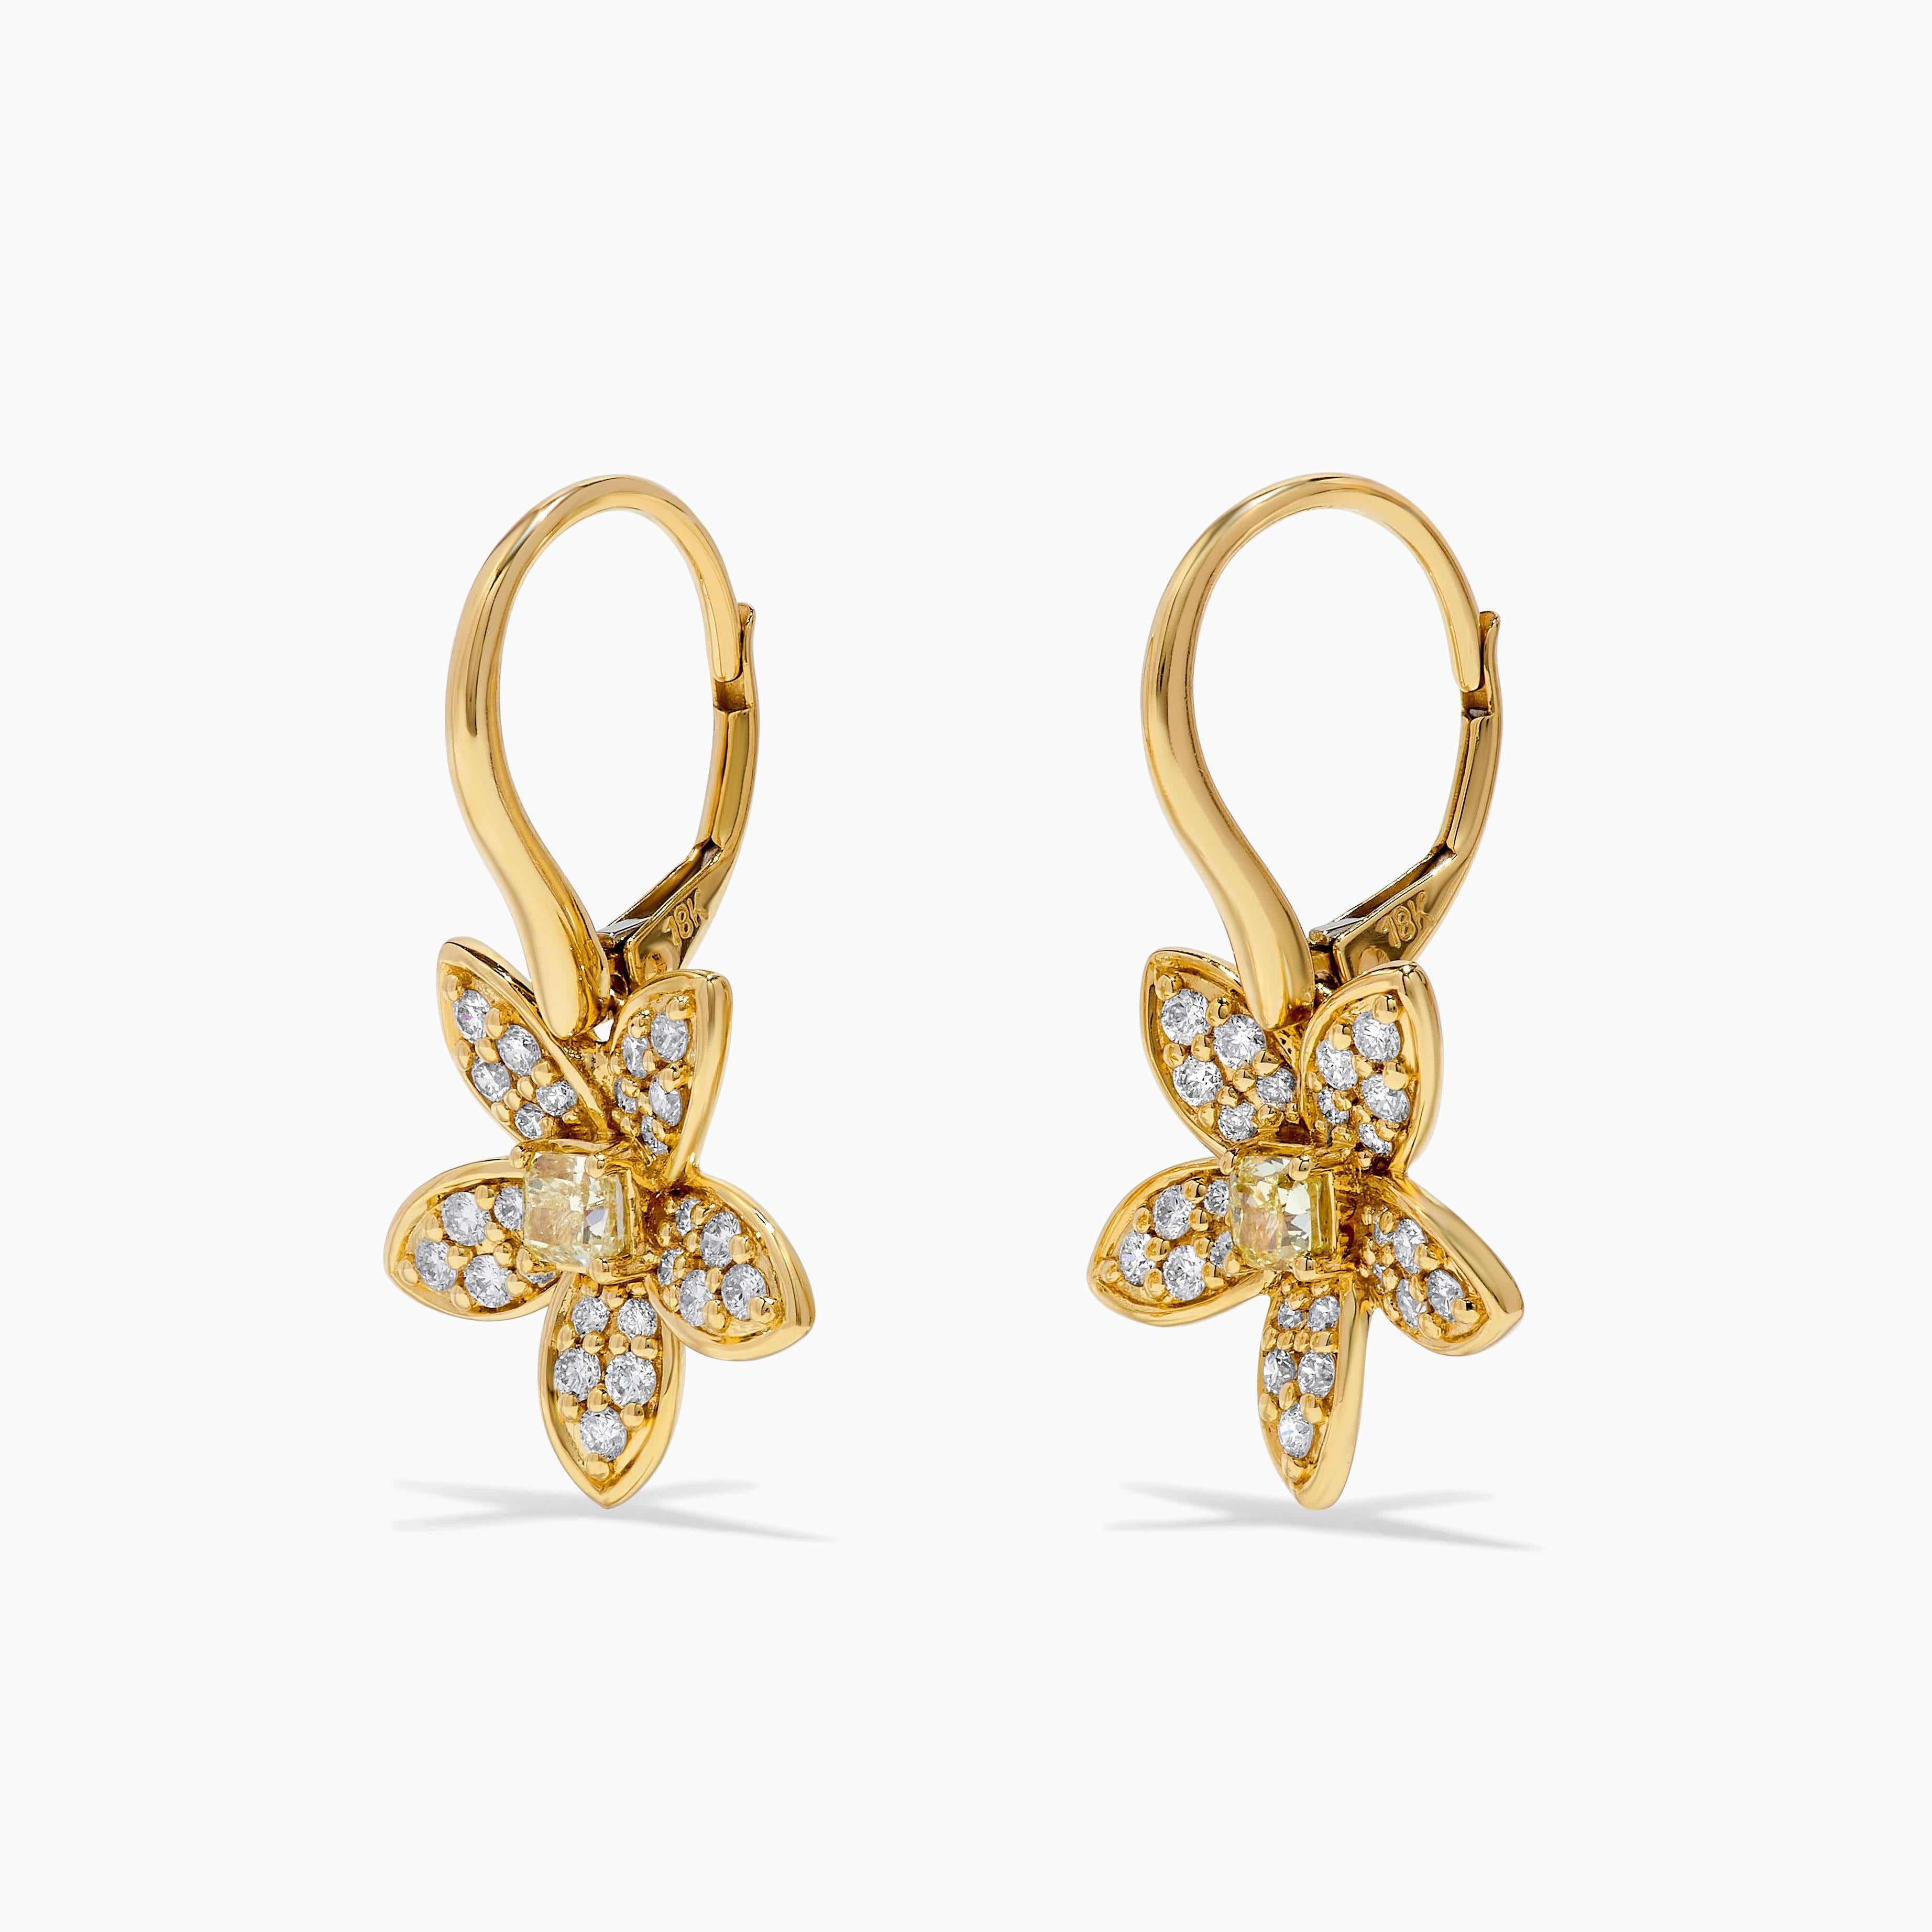 RareGemWorld's classic diamond earrings. Mounted in a beautiful 18K Yellow Gold setting with natural cushion cut yellow diamonds. The yellow diamonds are surrounded by small round natural white diamond melee in a beautiful flower form. These